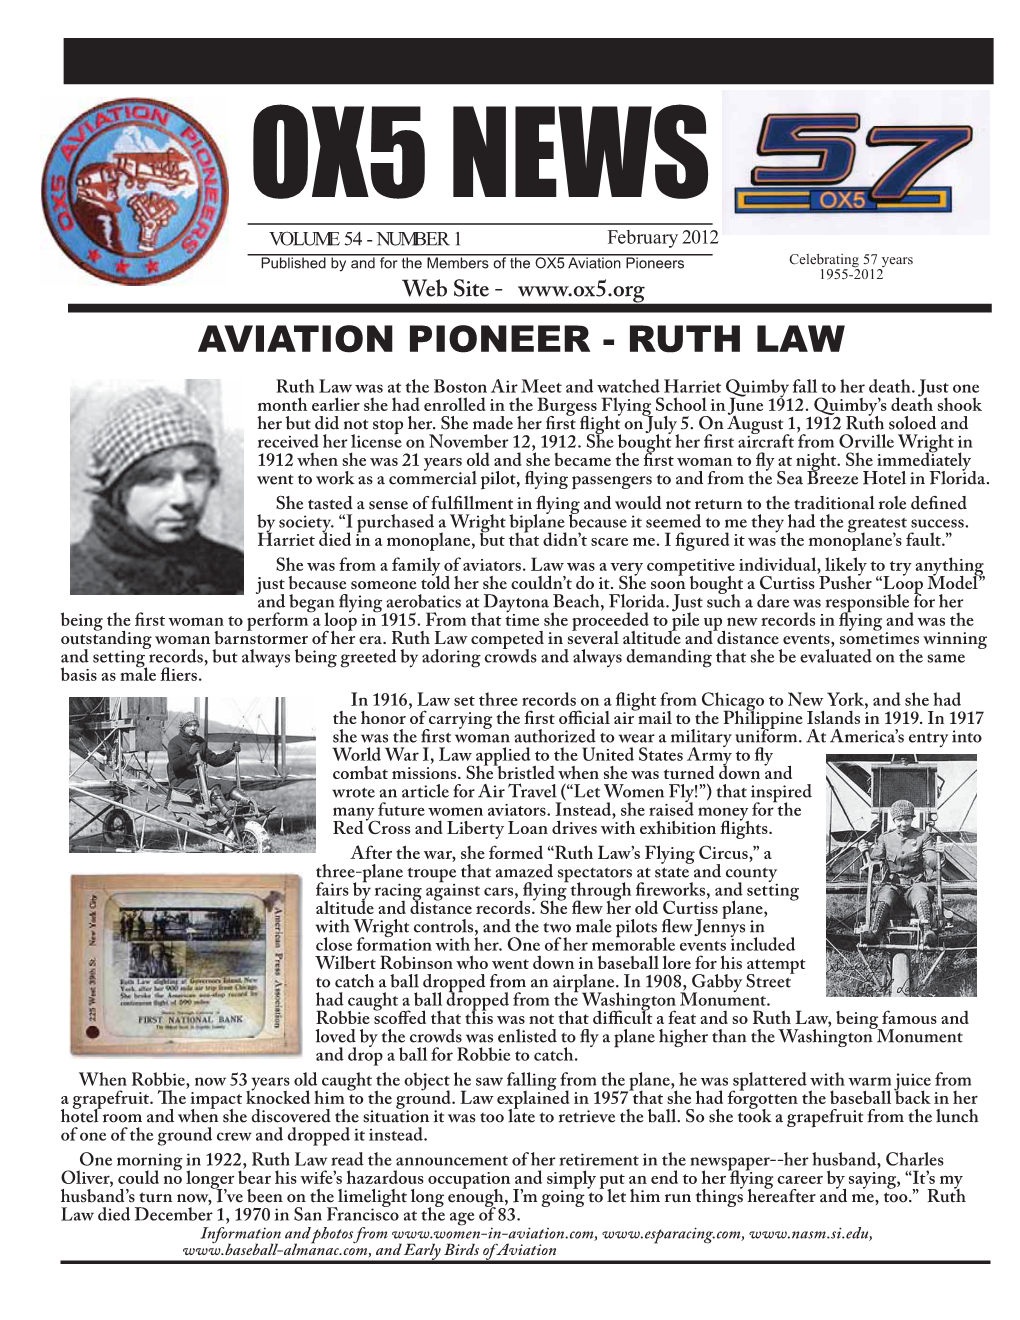 RUTH LAW Ruth Law Was at the Boston Air Meet and Watched Harriet Quimby Fall to Her Death